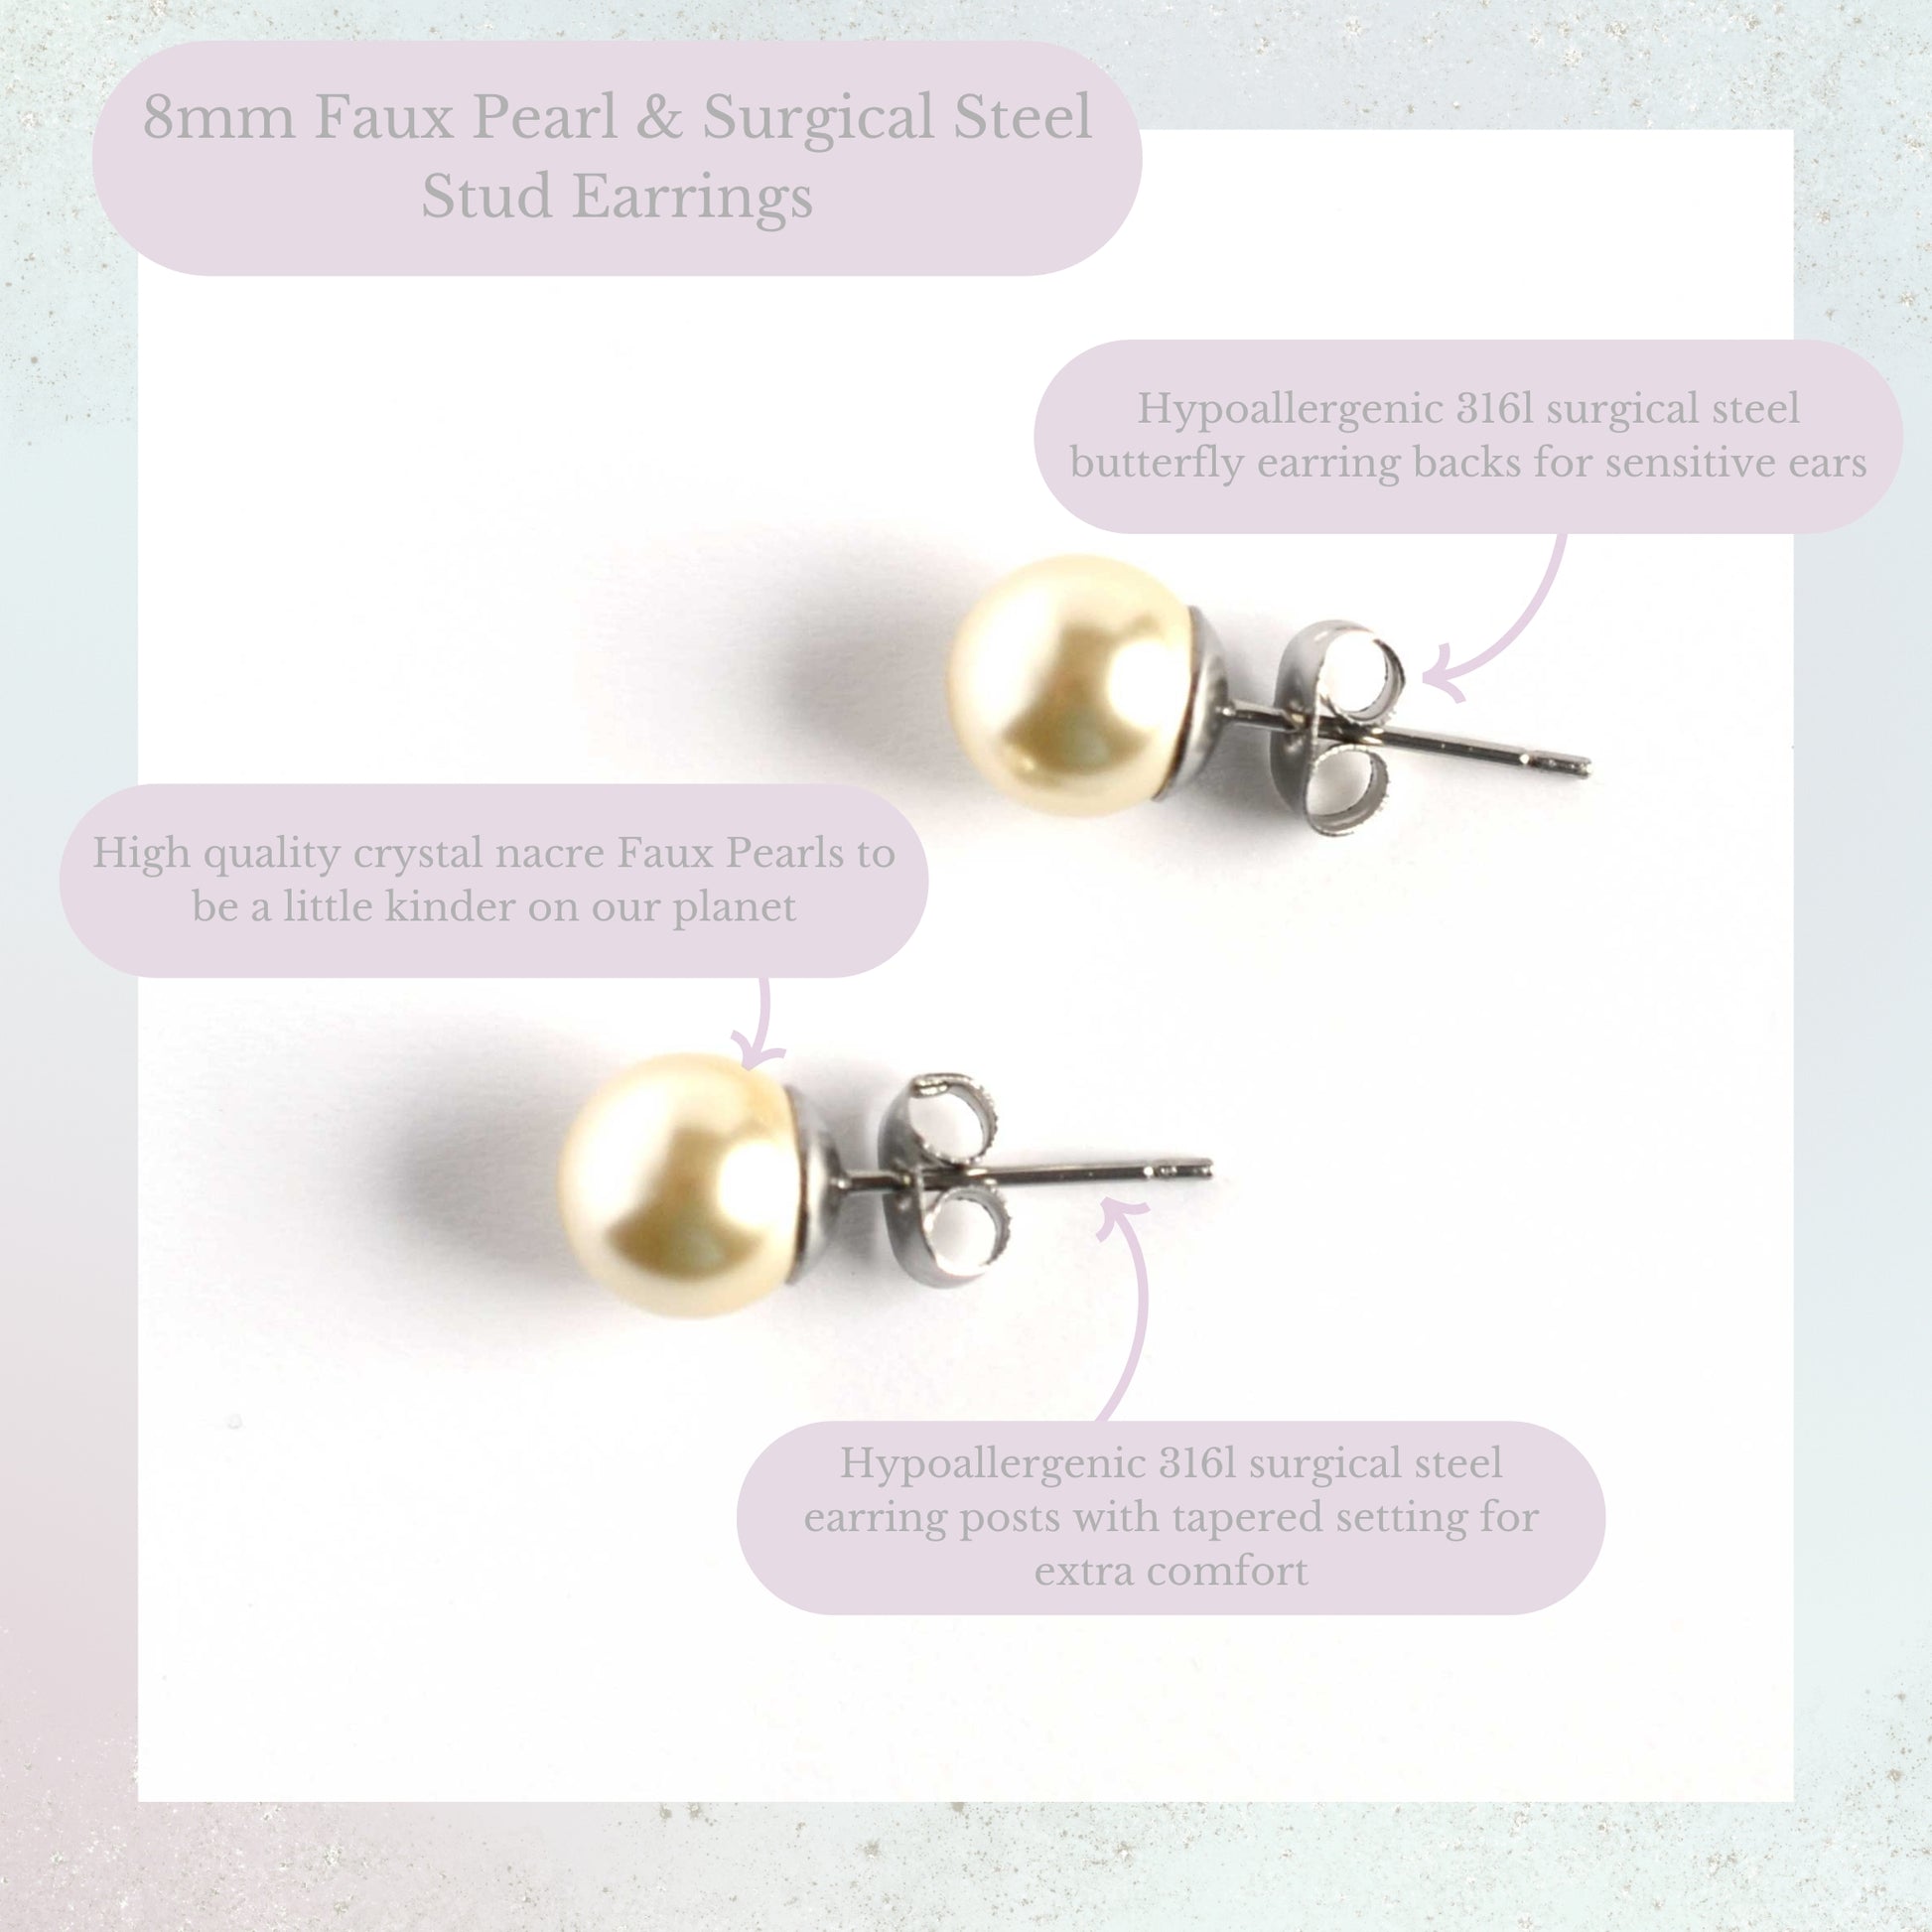 8mm faux pearl and surgical steel product information graphic